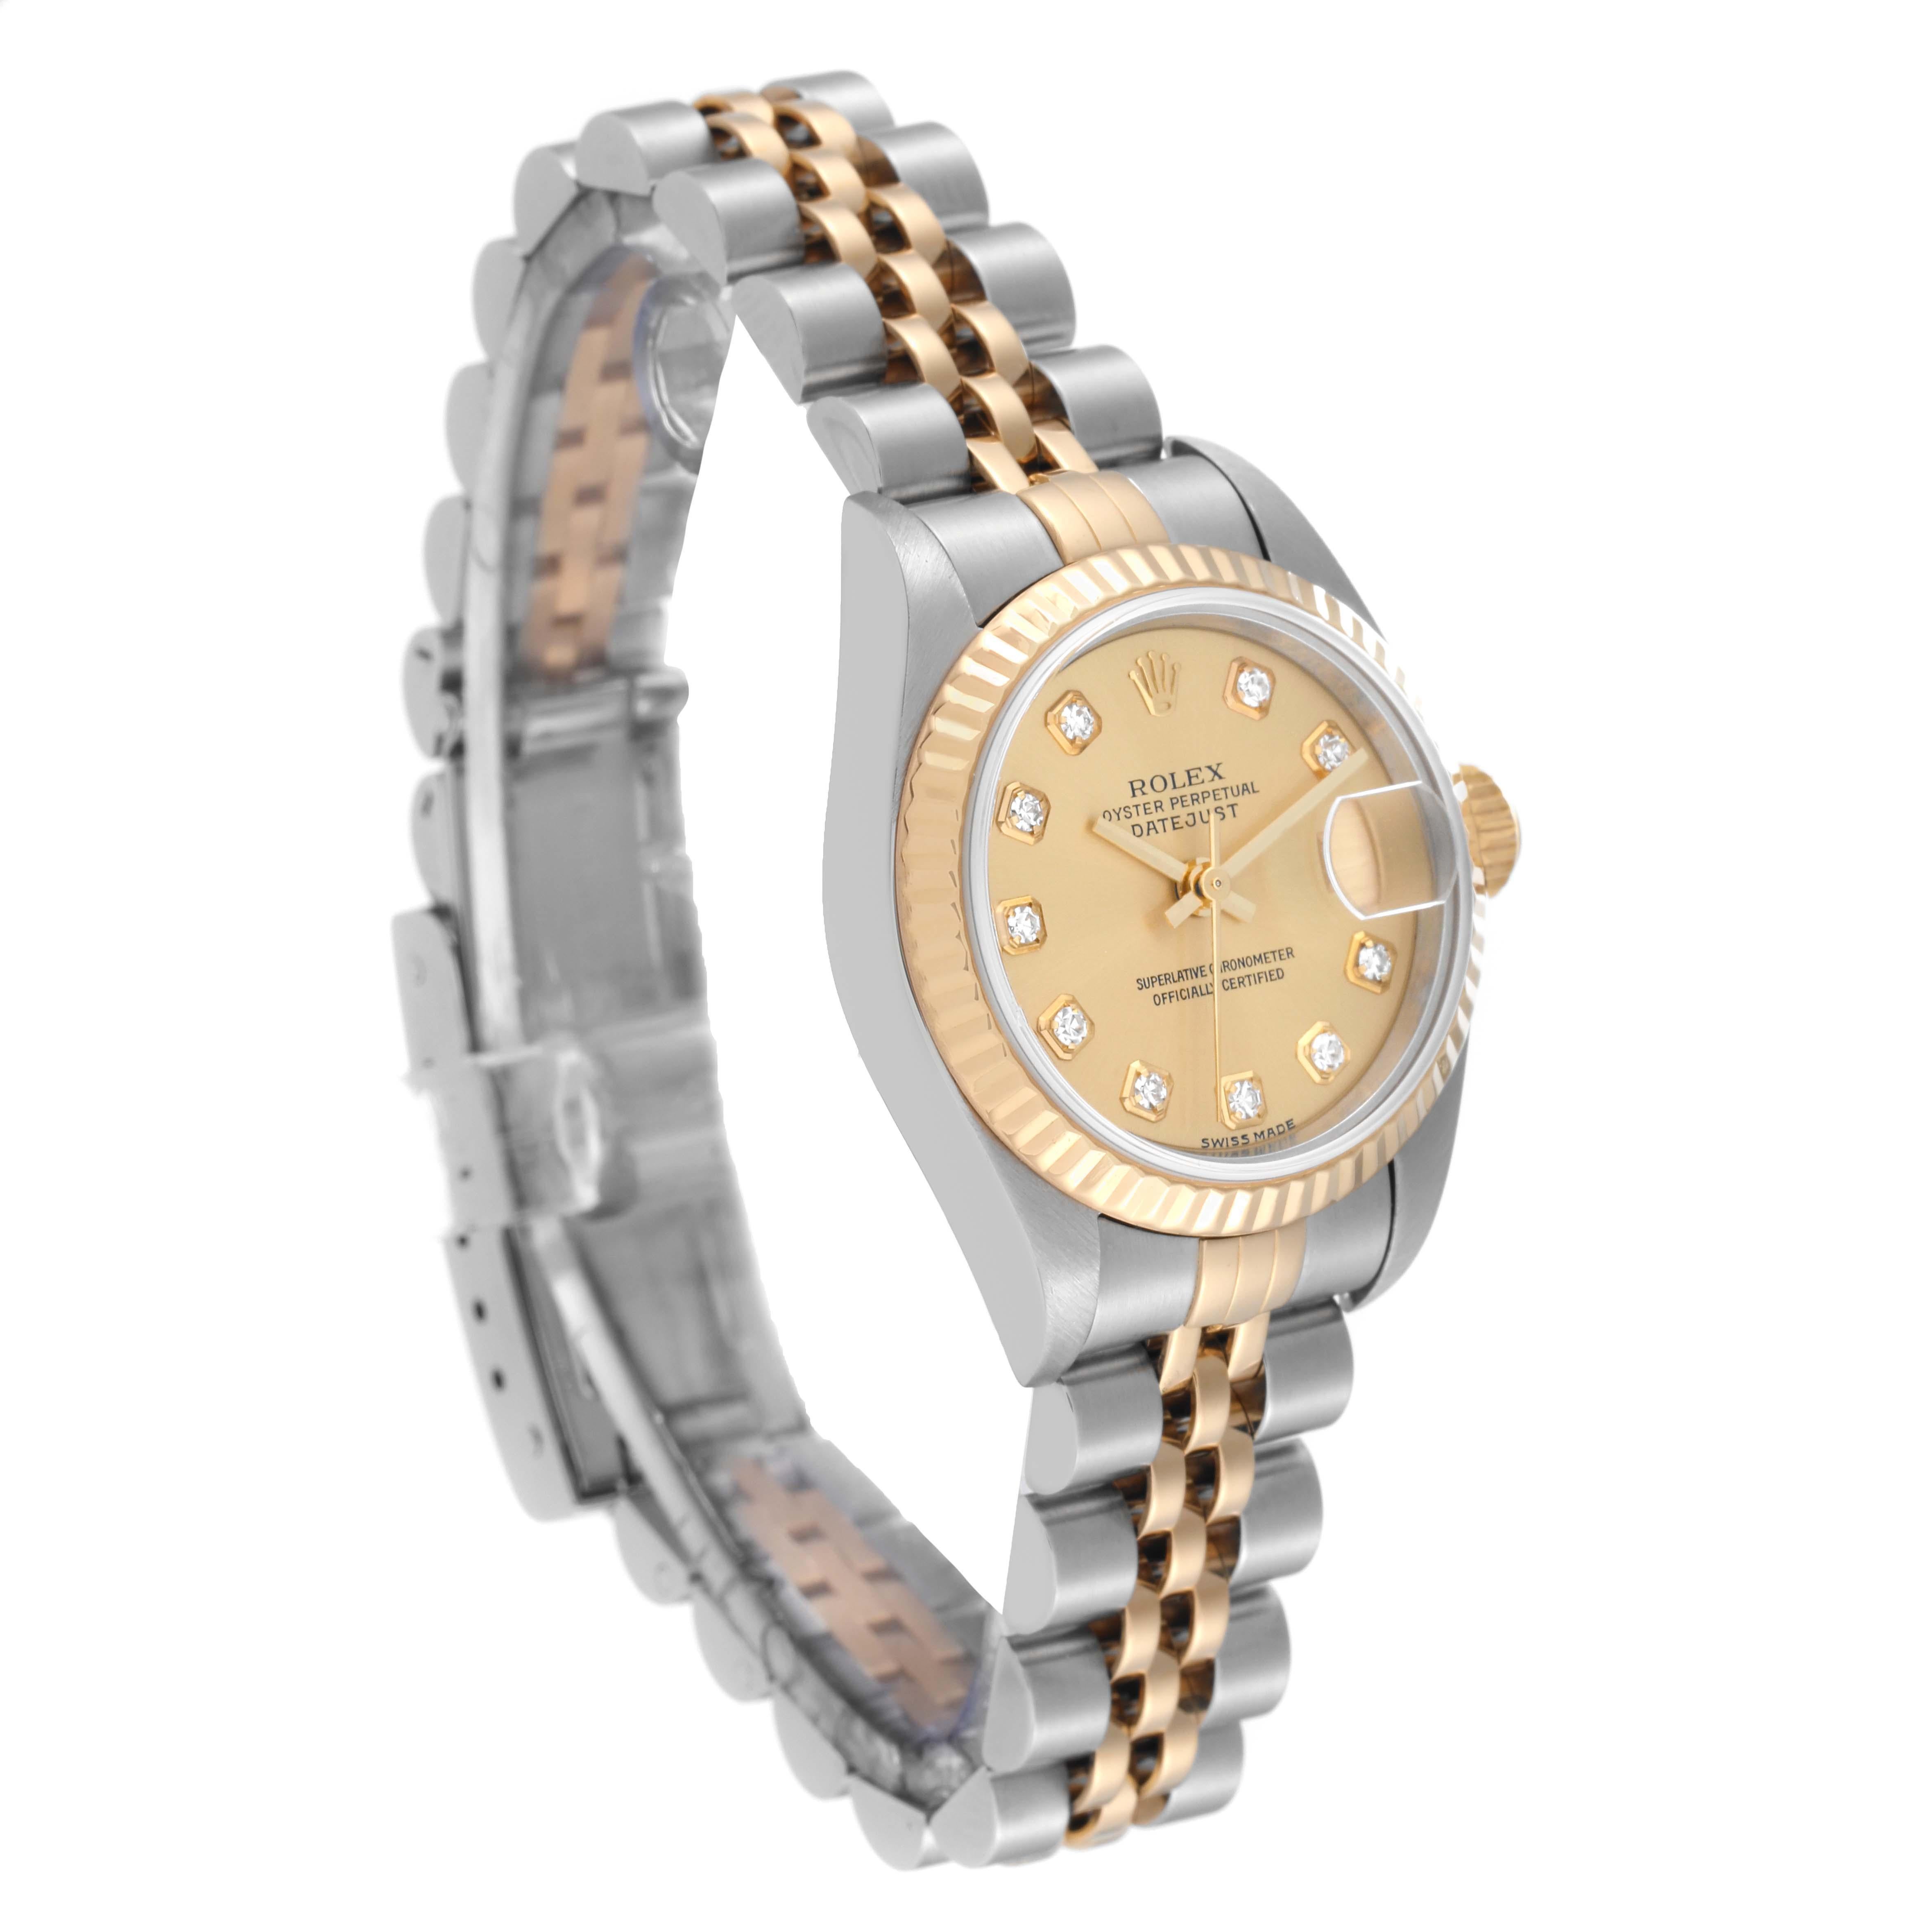 Rolex Datejust Steel Yellow Gold Champagne Diamond Dial Ladies Watch 79173 For Sale 7